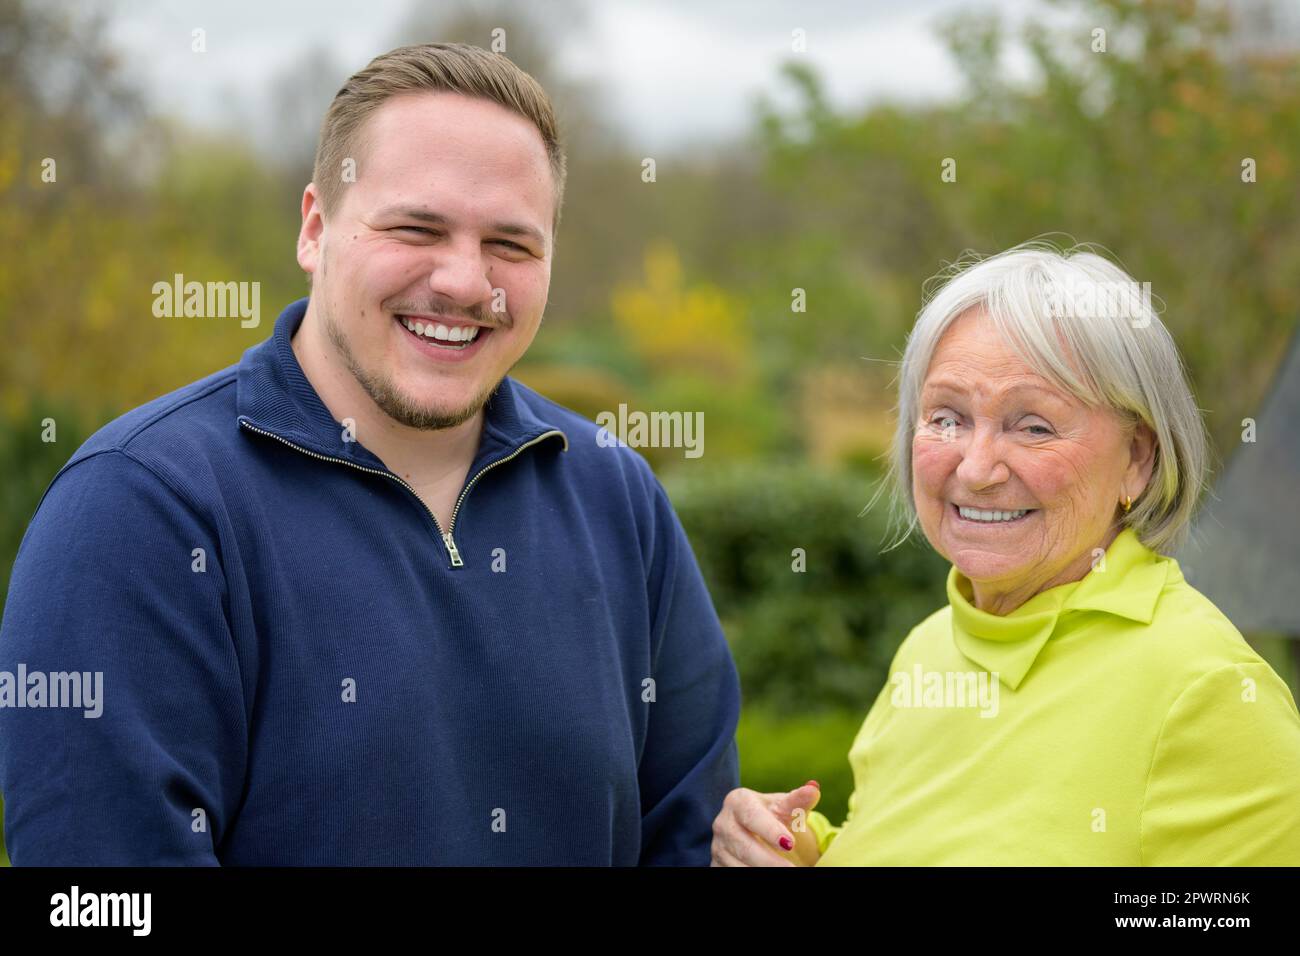 Two generation family, grandmother and grandson standing next to each other laughing Stock Photo